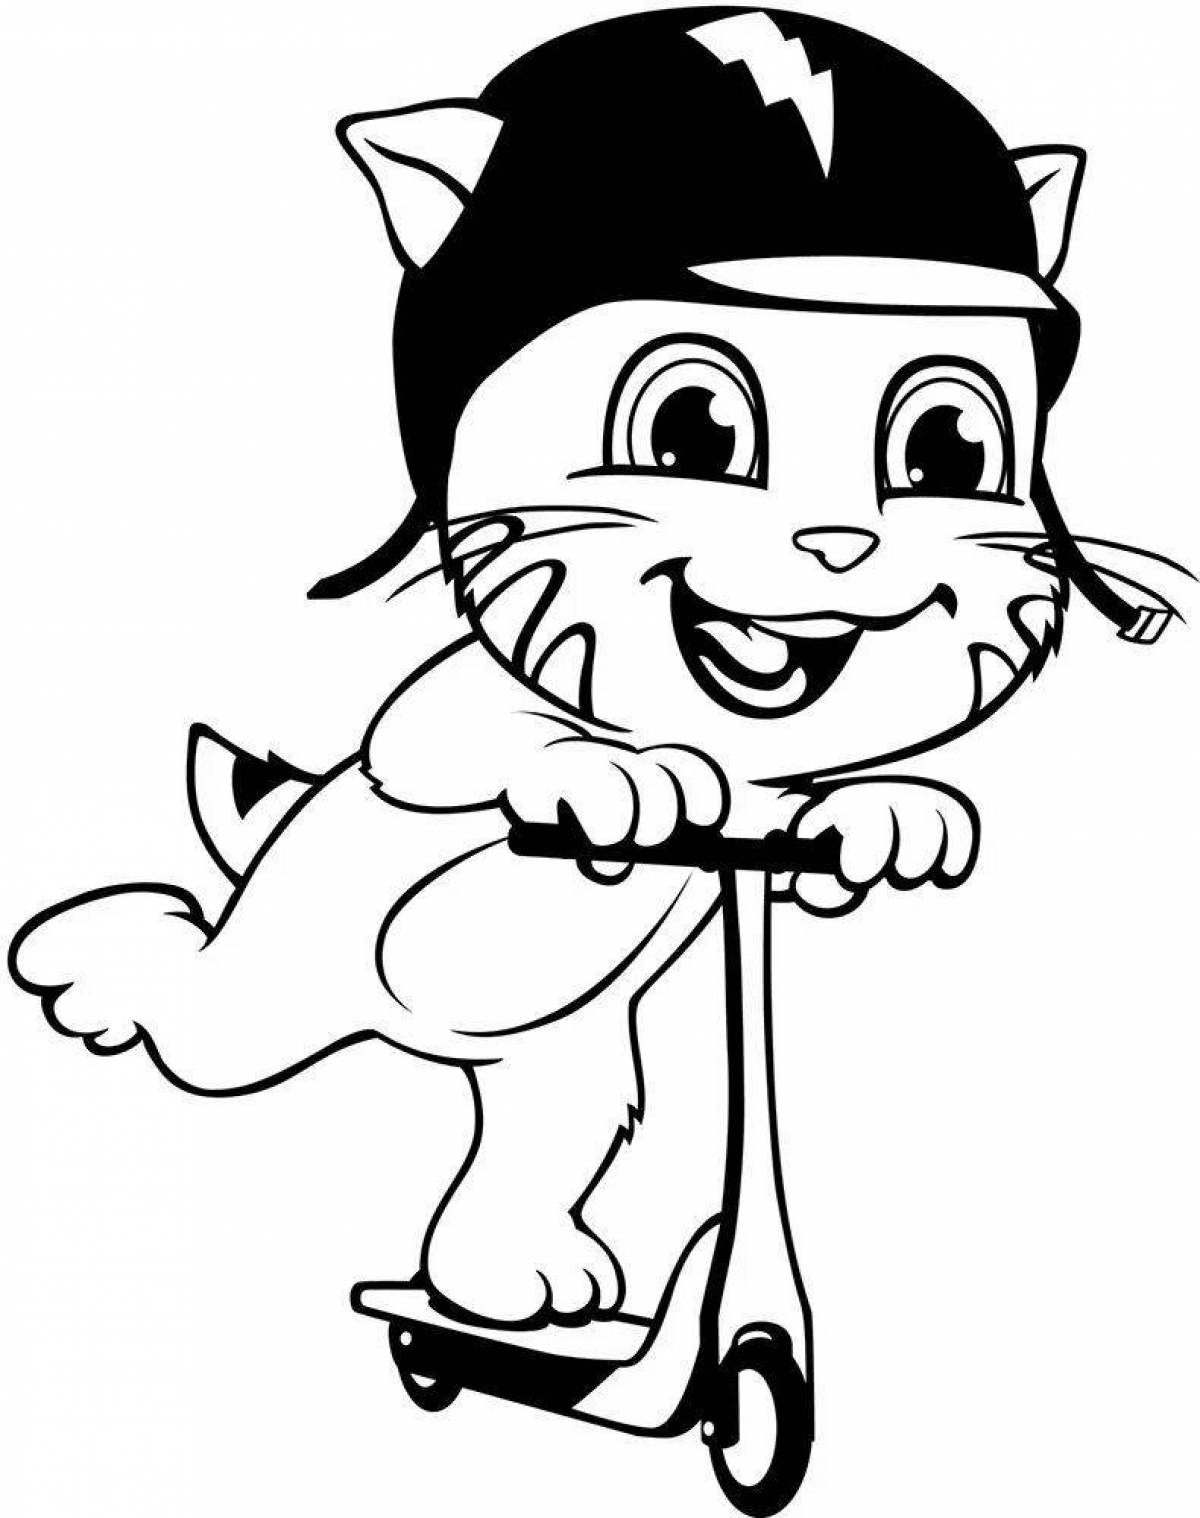 Fun coloring book of Tom and Angela's cat